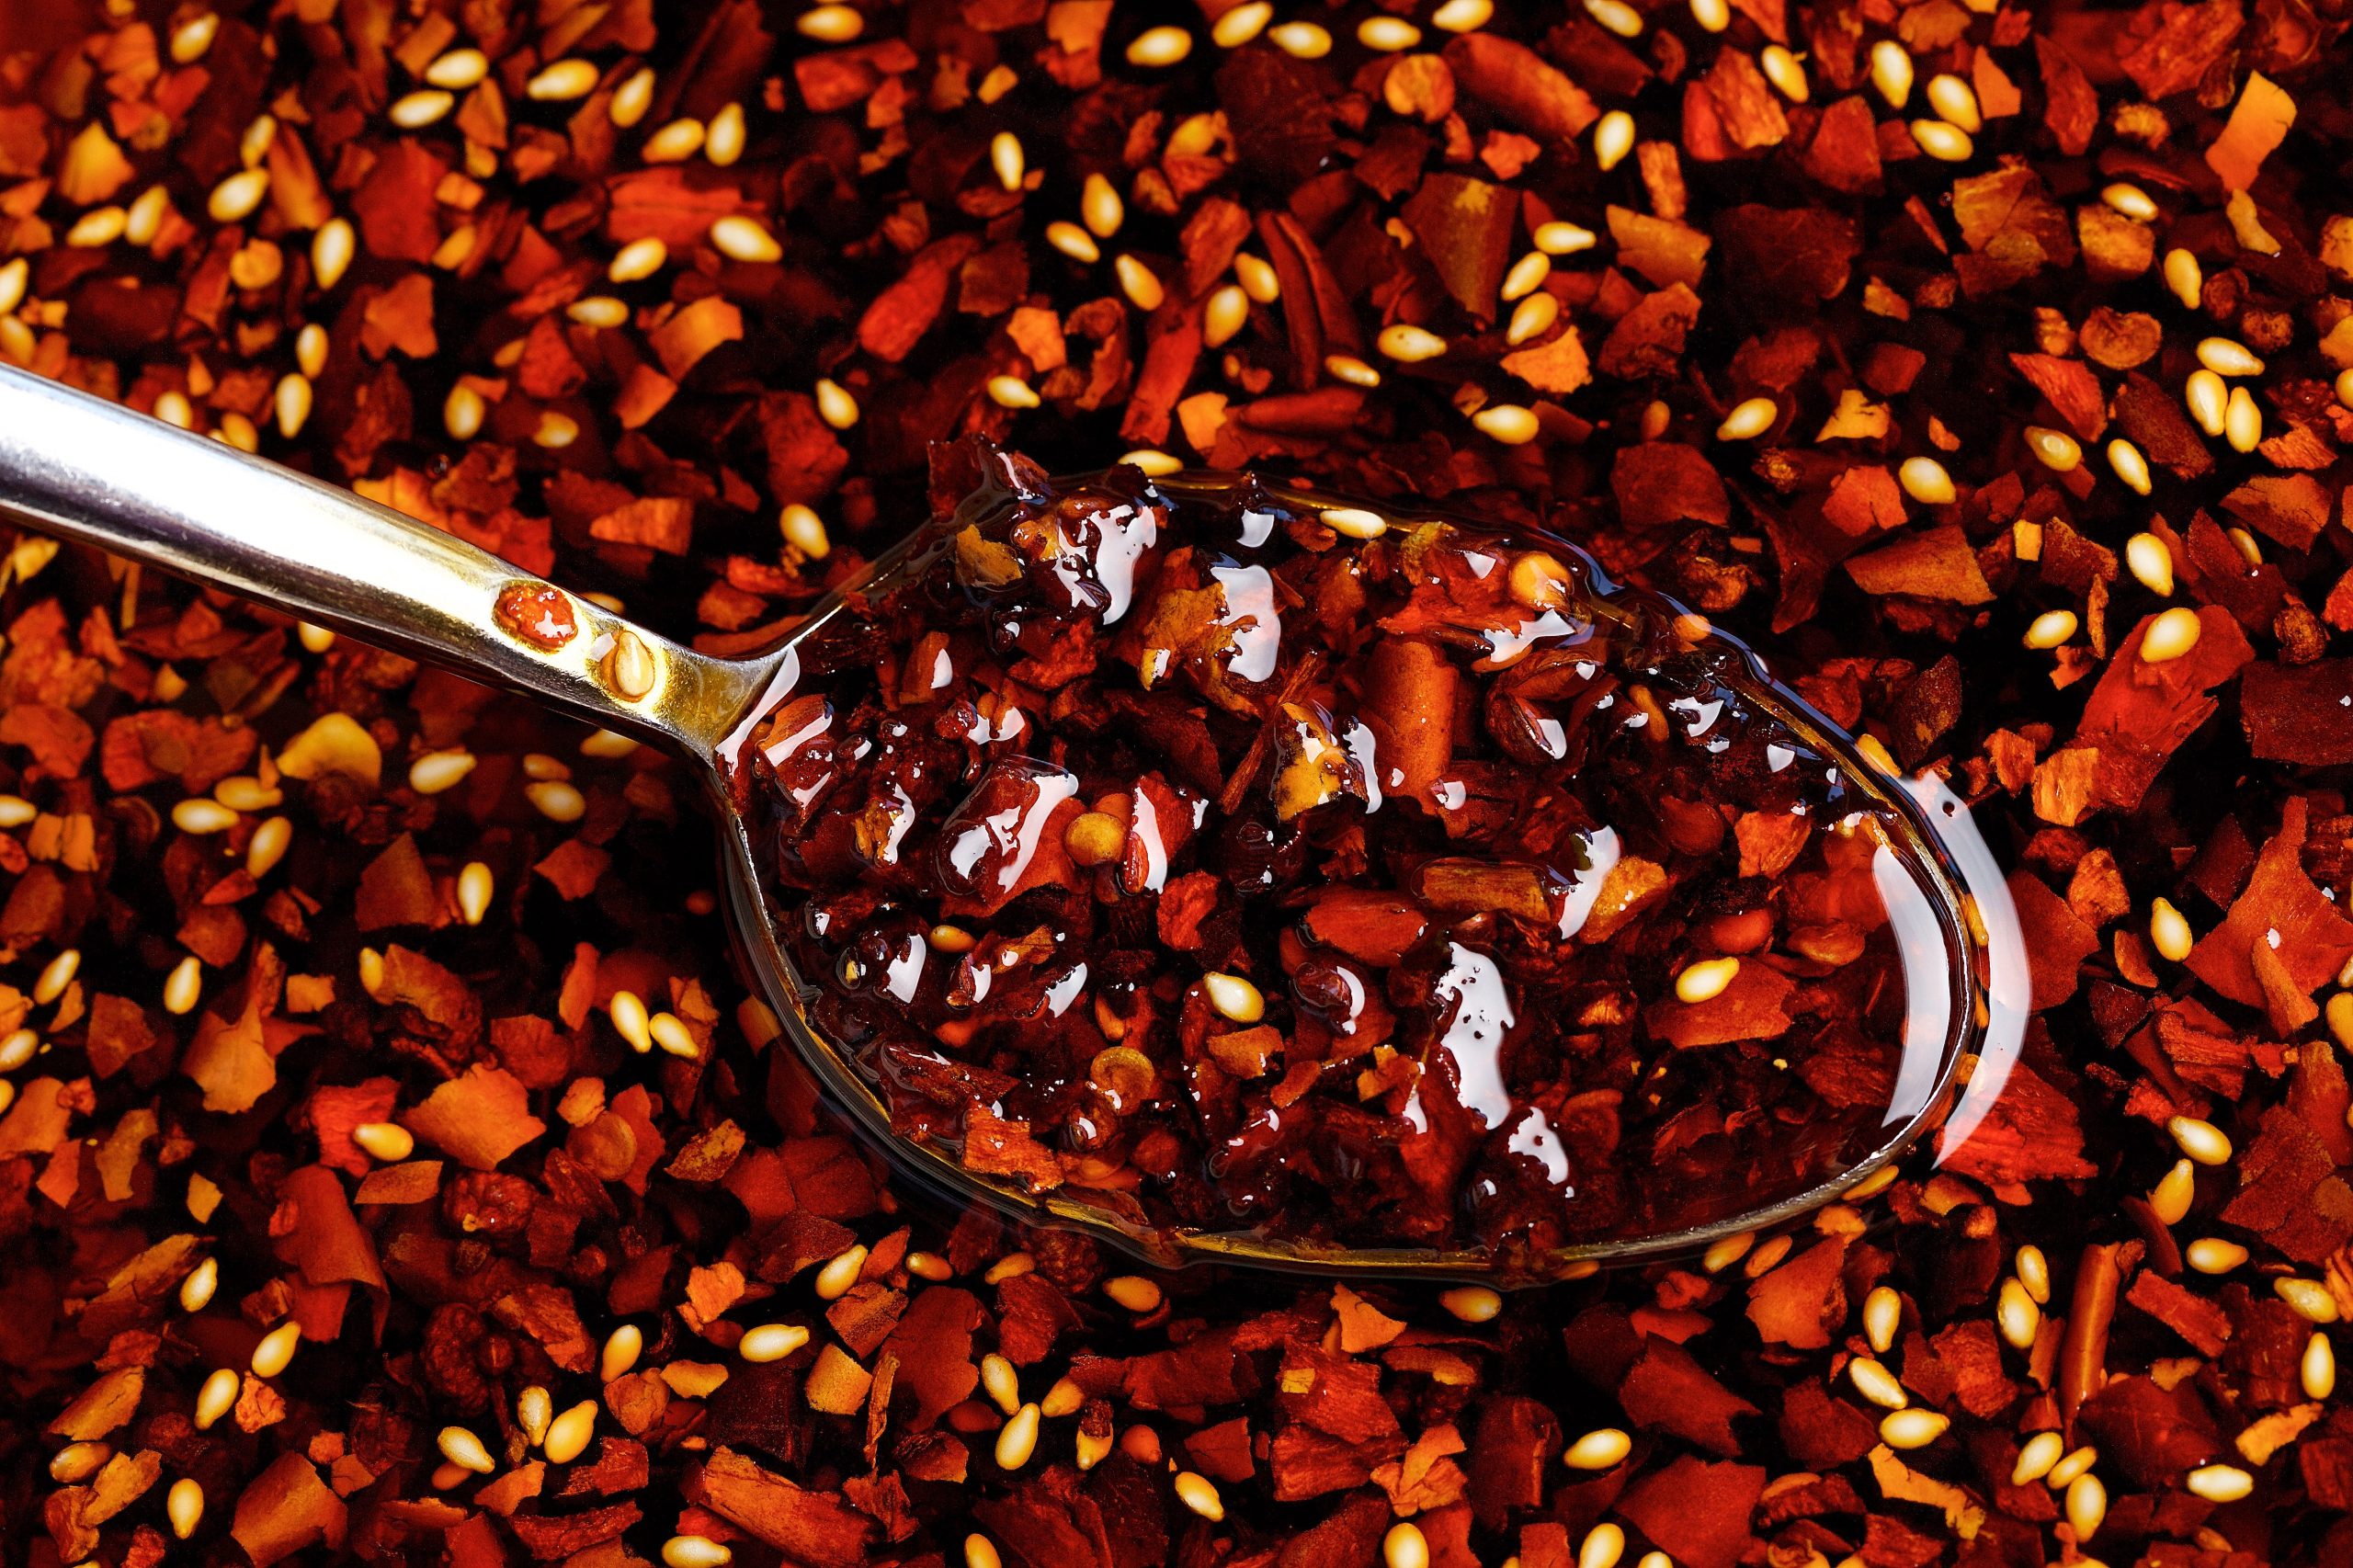 6 Creative Ways to Use Chili Crisp to Level Up Your Everyday Meals